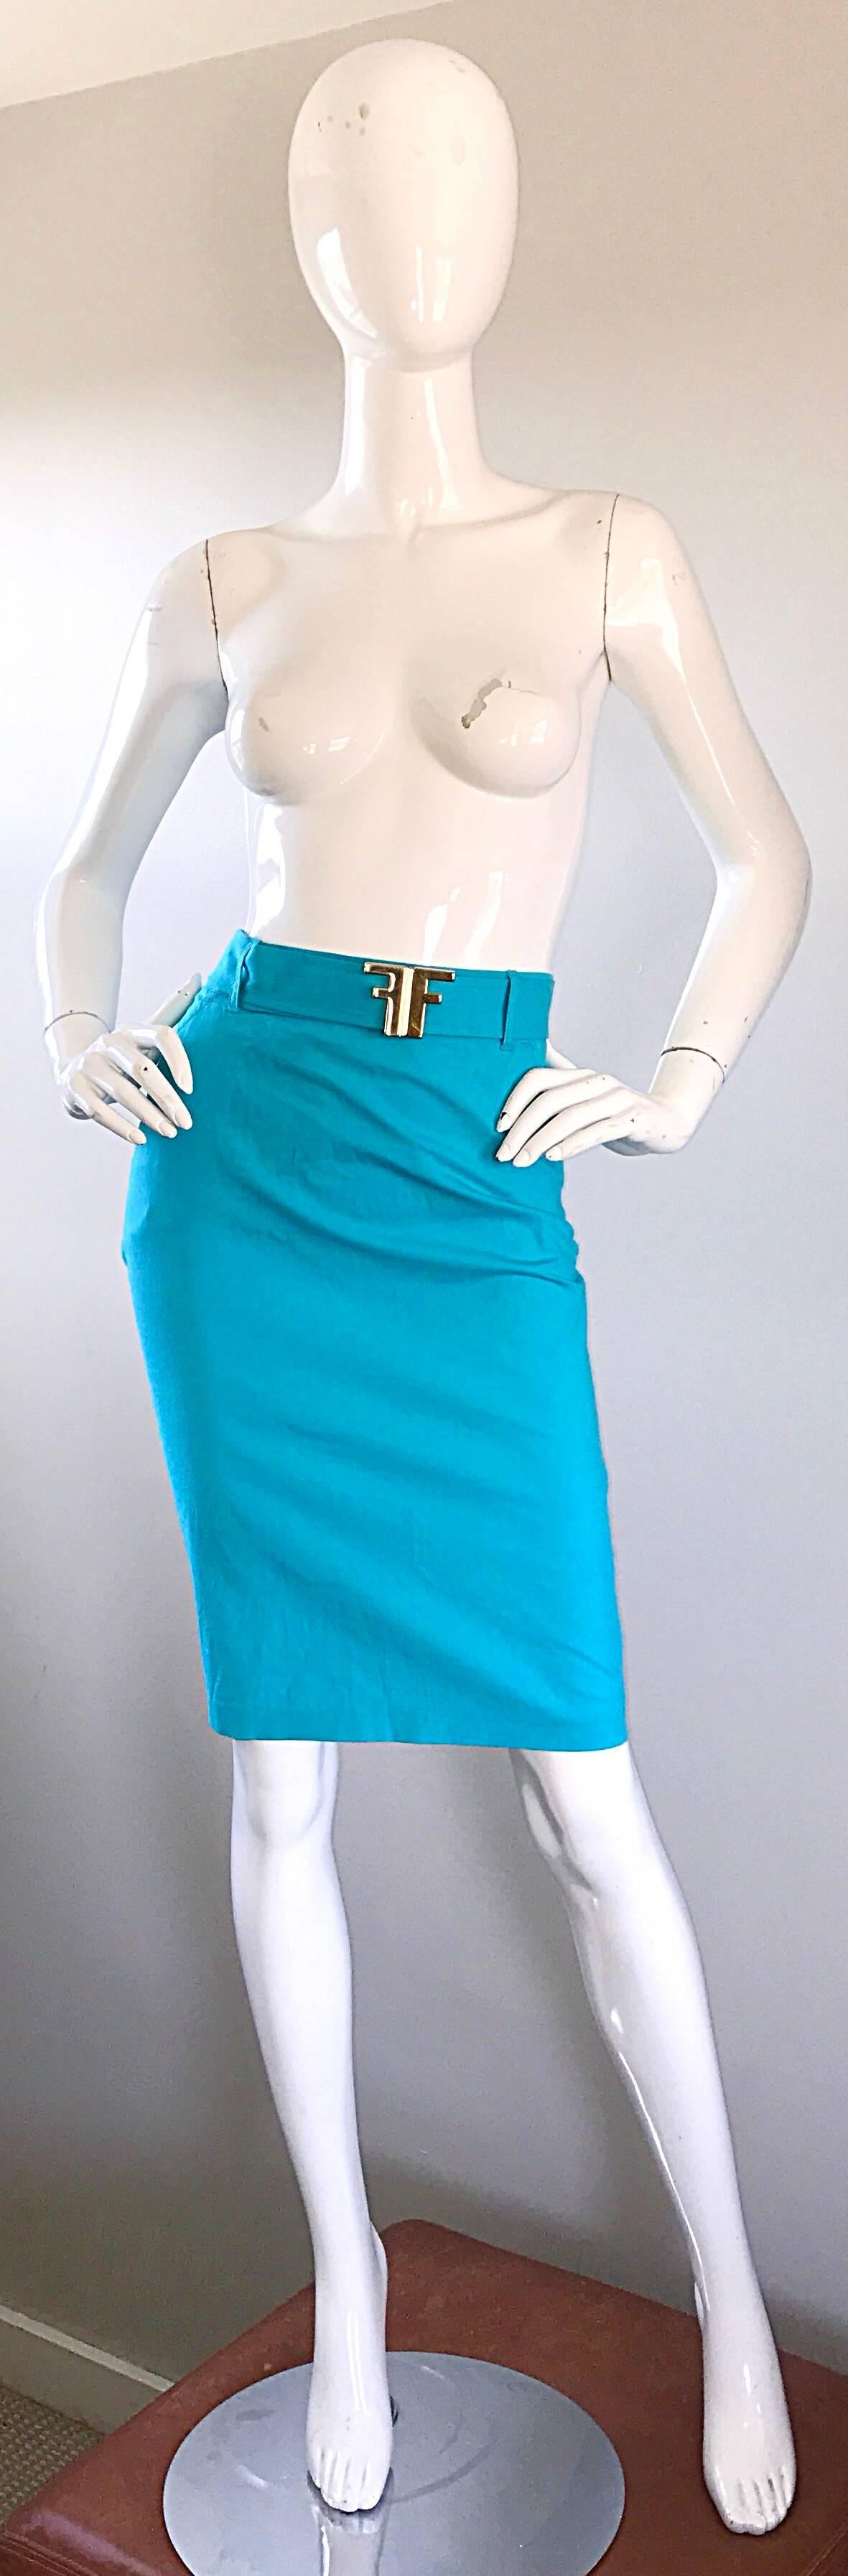 Women's 1990s Fendi By Karl Lagerfeld Vintage Turquoise Teal Blue Cotton Skirt w FF Belt For Sale